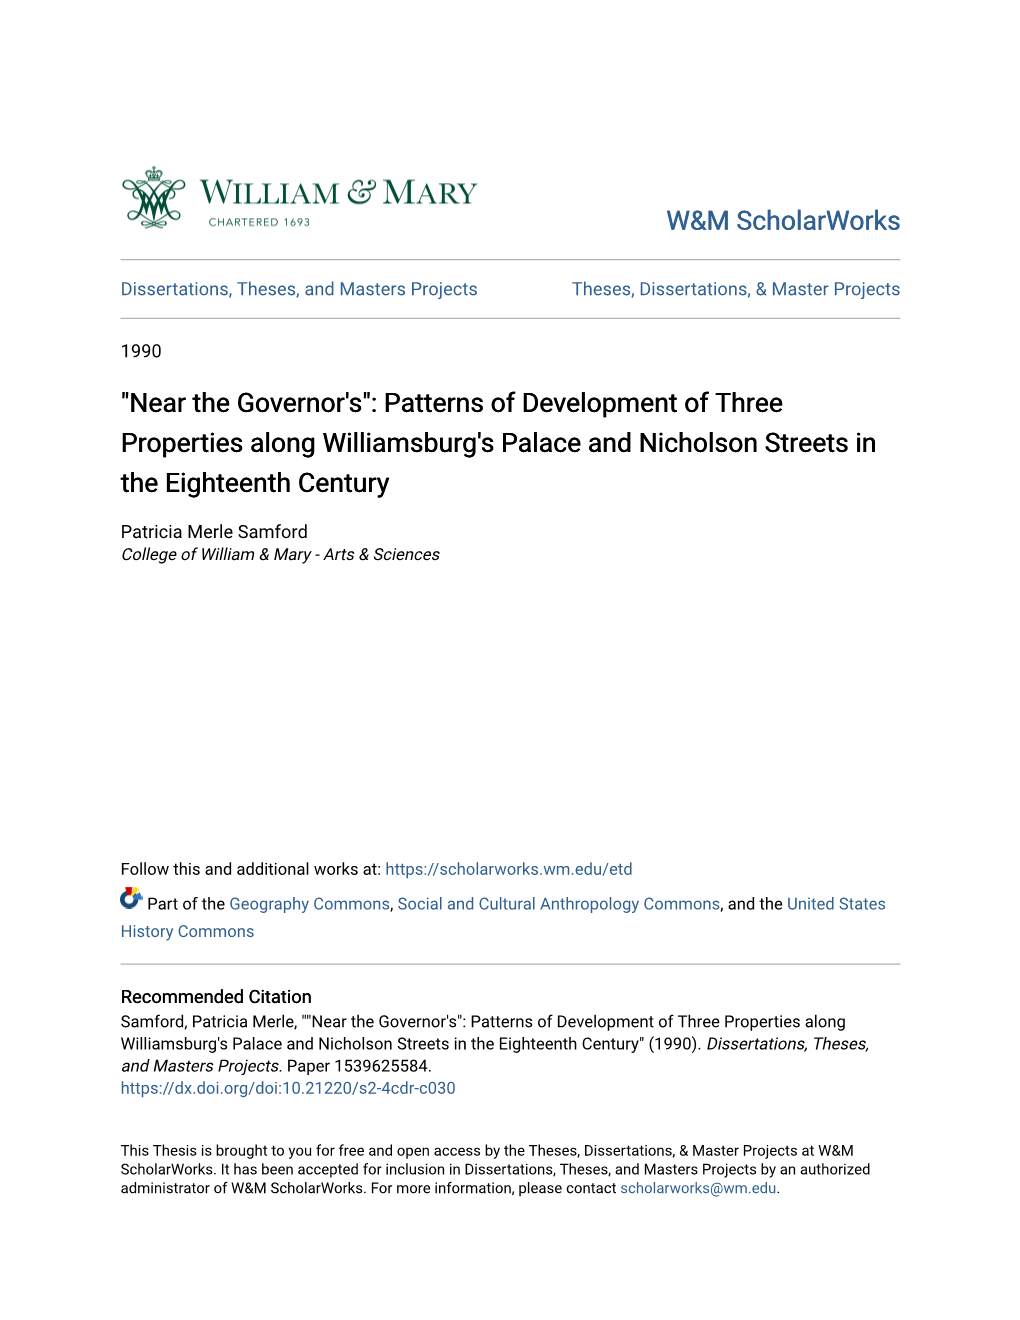 "Near the Governor's": Patterns of Development of Three Properties Along Williamsburg's Palace and Nicholson Streets in the Eighteenth Century